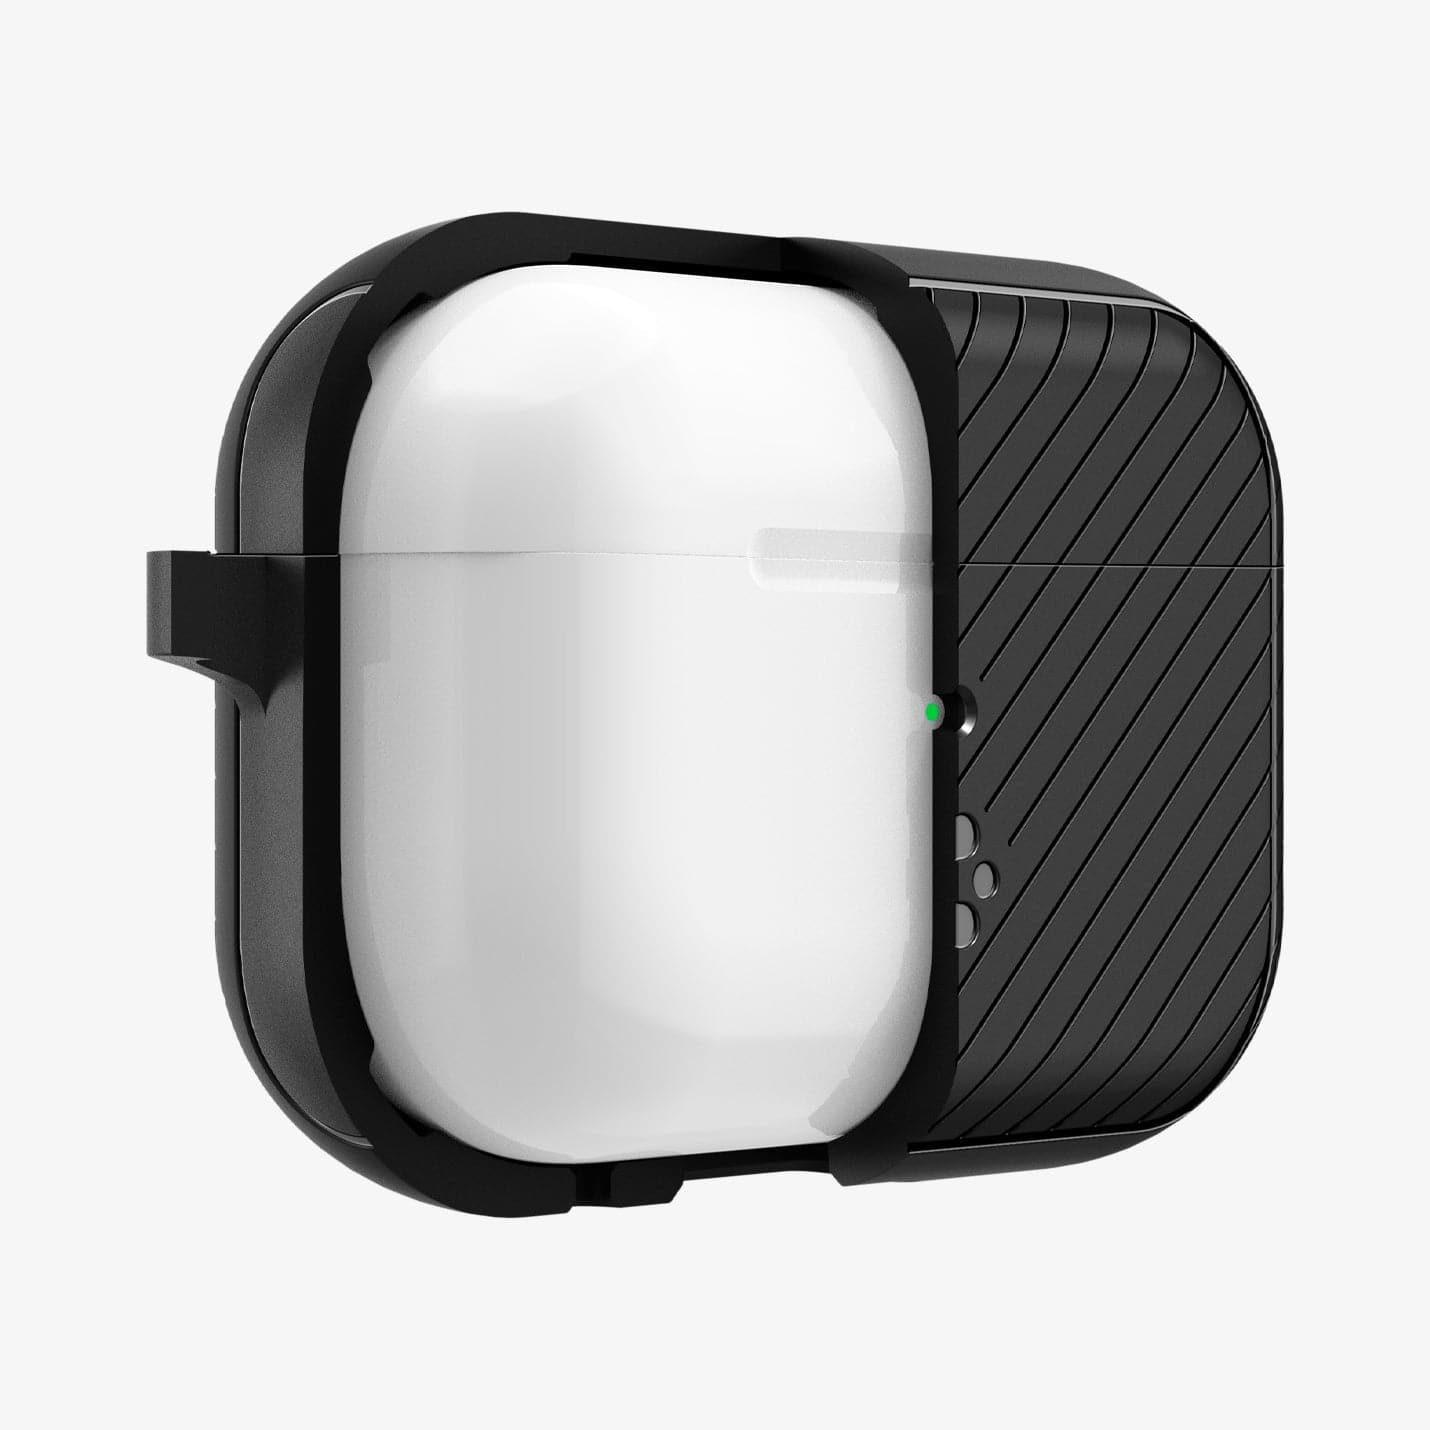 ACS05484 - Apple AirPods Pro 2 Case Mag Armor (MagFit) in matte black showing the front with case cut half open